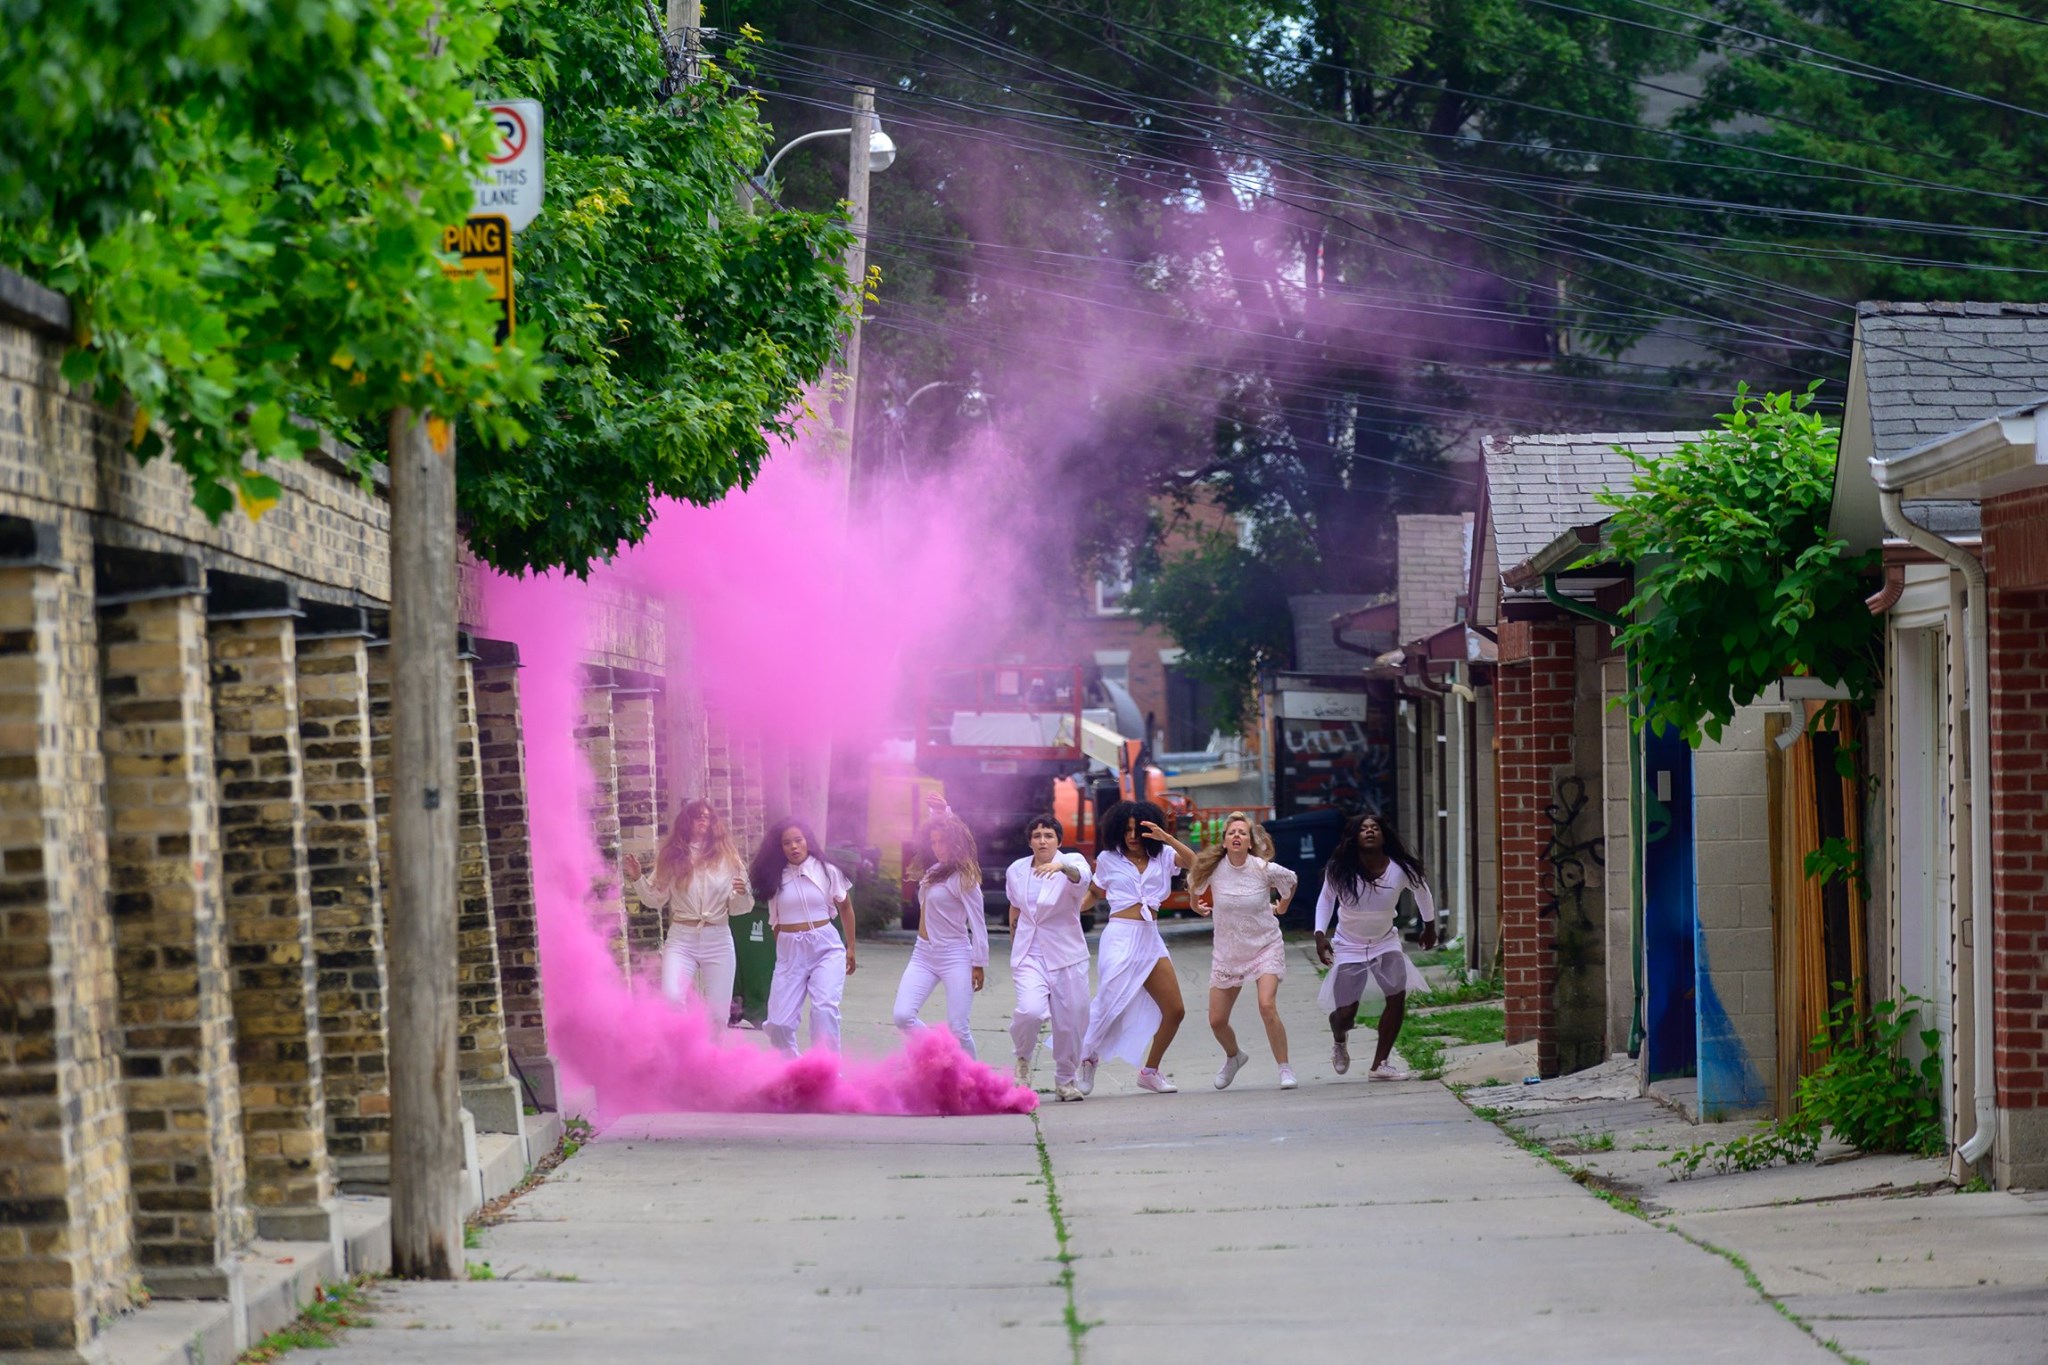 a group of people dance in an alleyway, with pink smoke billowing around them